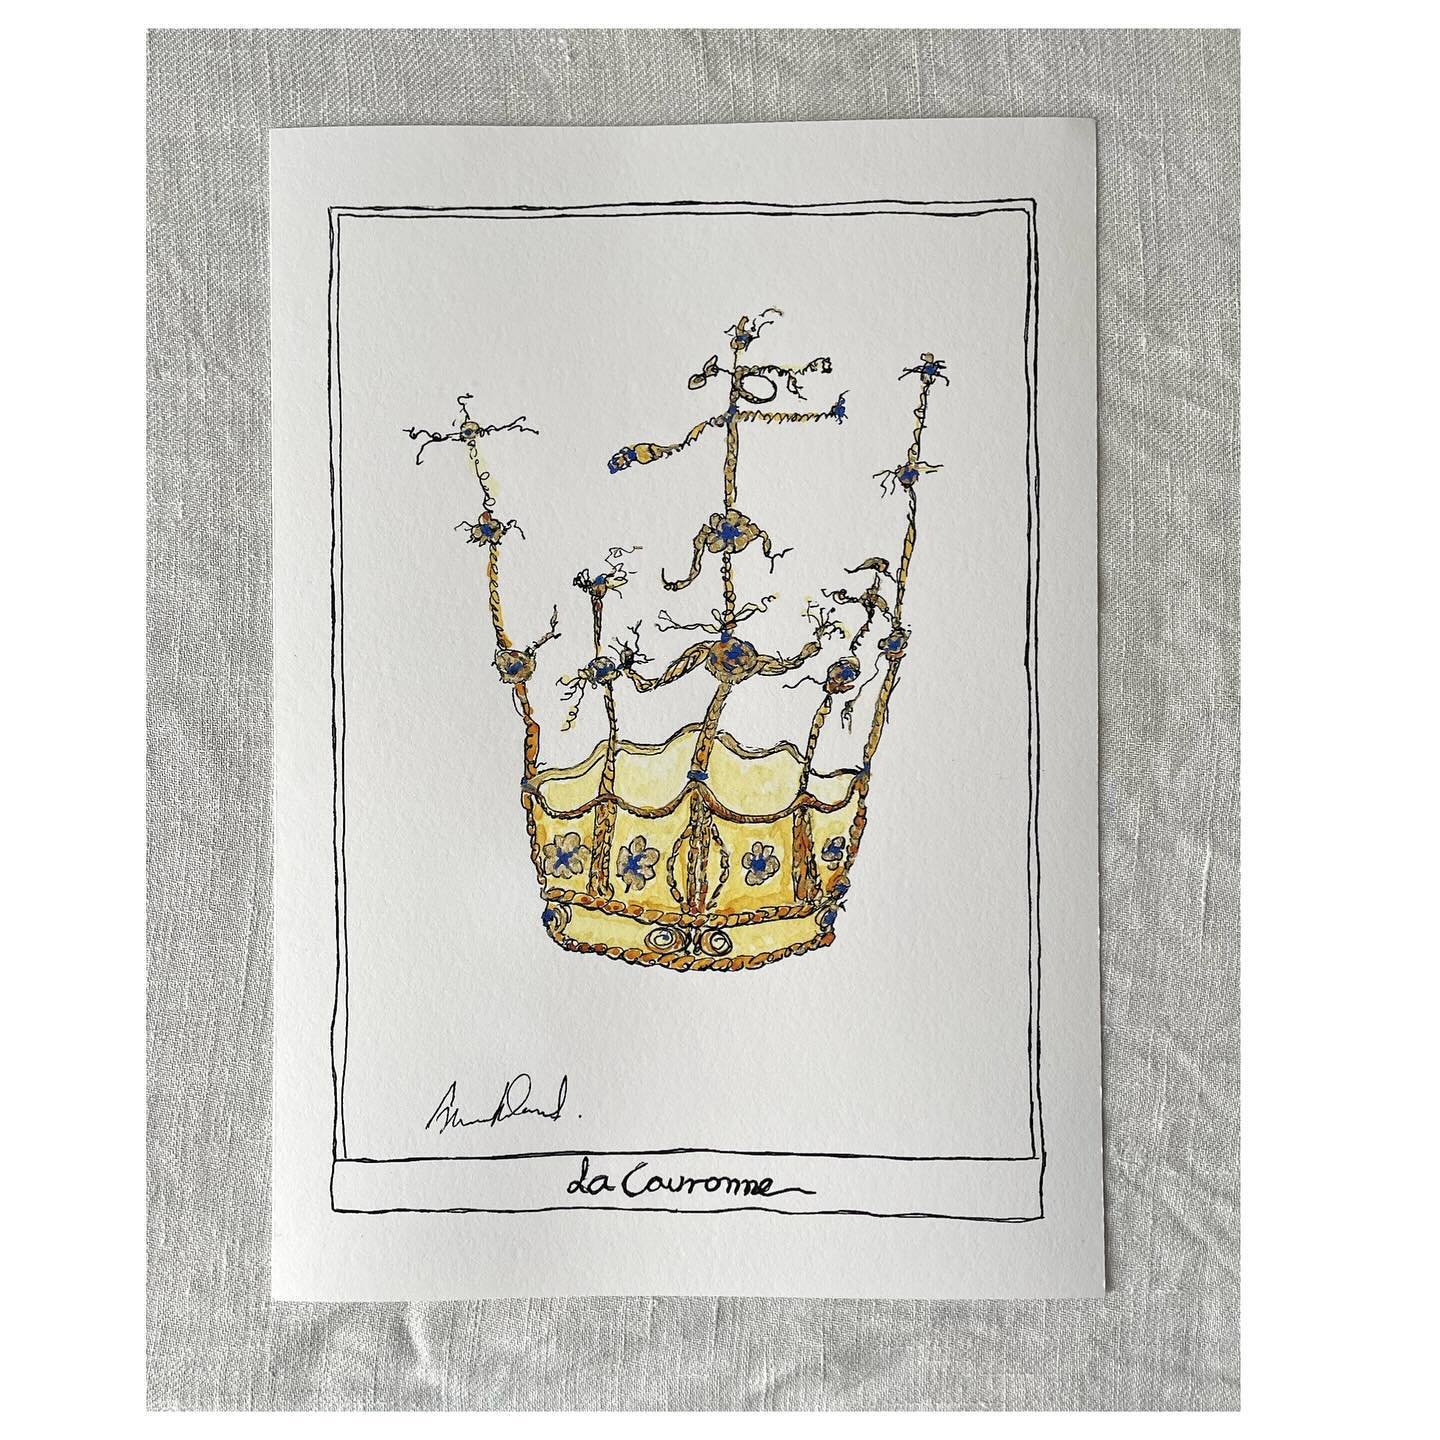 La Couronne👑

Hand-painted in Provence. 9 April 2024. 

Signed by the artist on the front and the back. 

Masterwork line drawing,  illustrated by the artist. Pen on cold press 300gsm  fine paper. Printed and handpainted with watercolour. 

Features